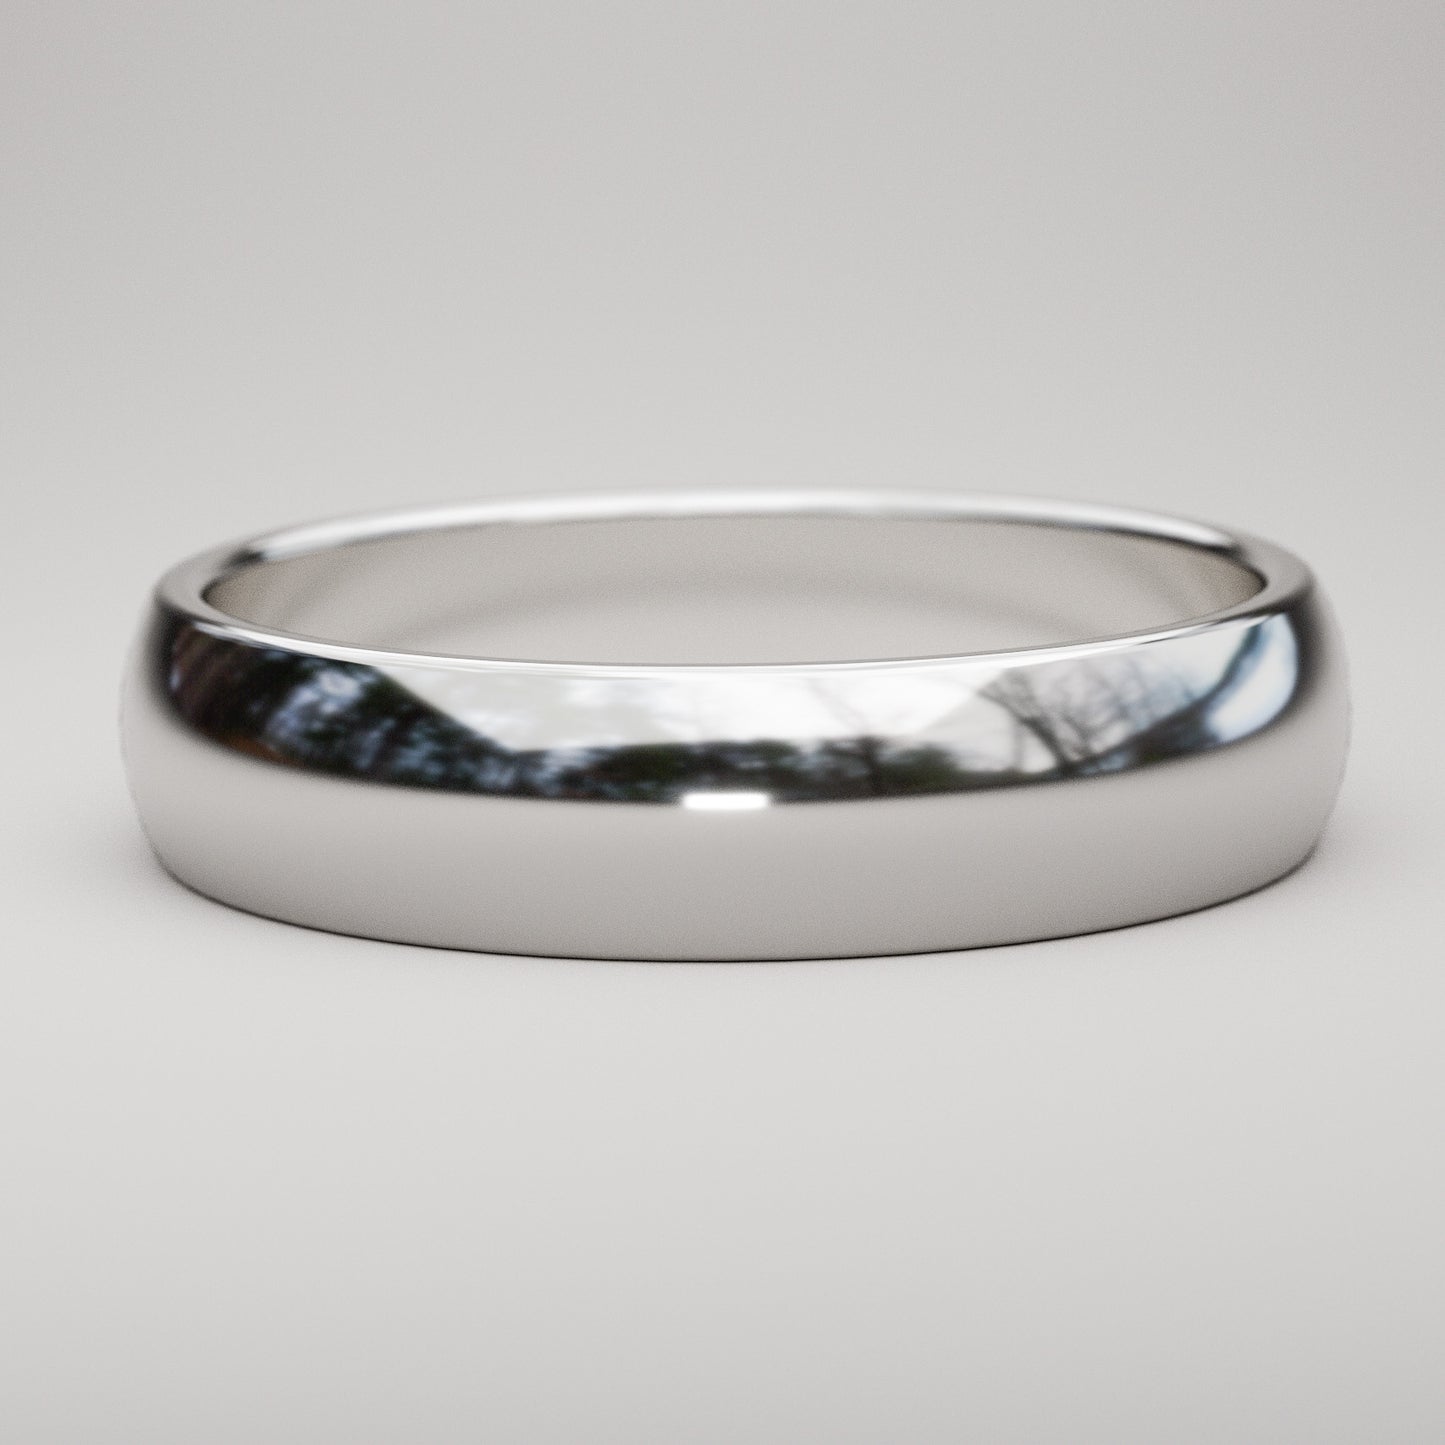 5mm wide 14k white gold wedding band